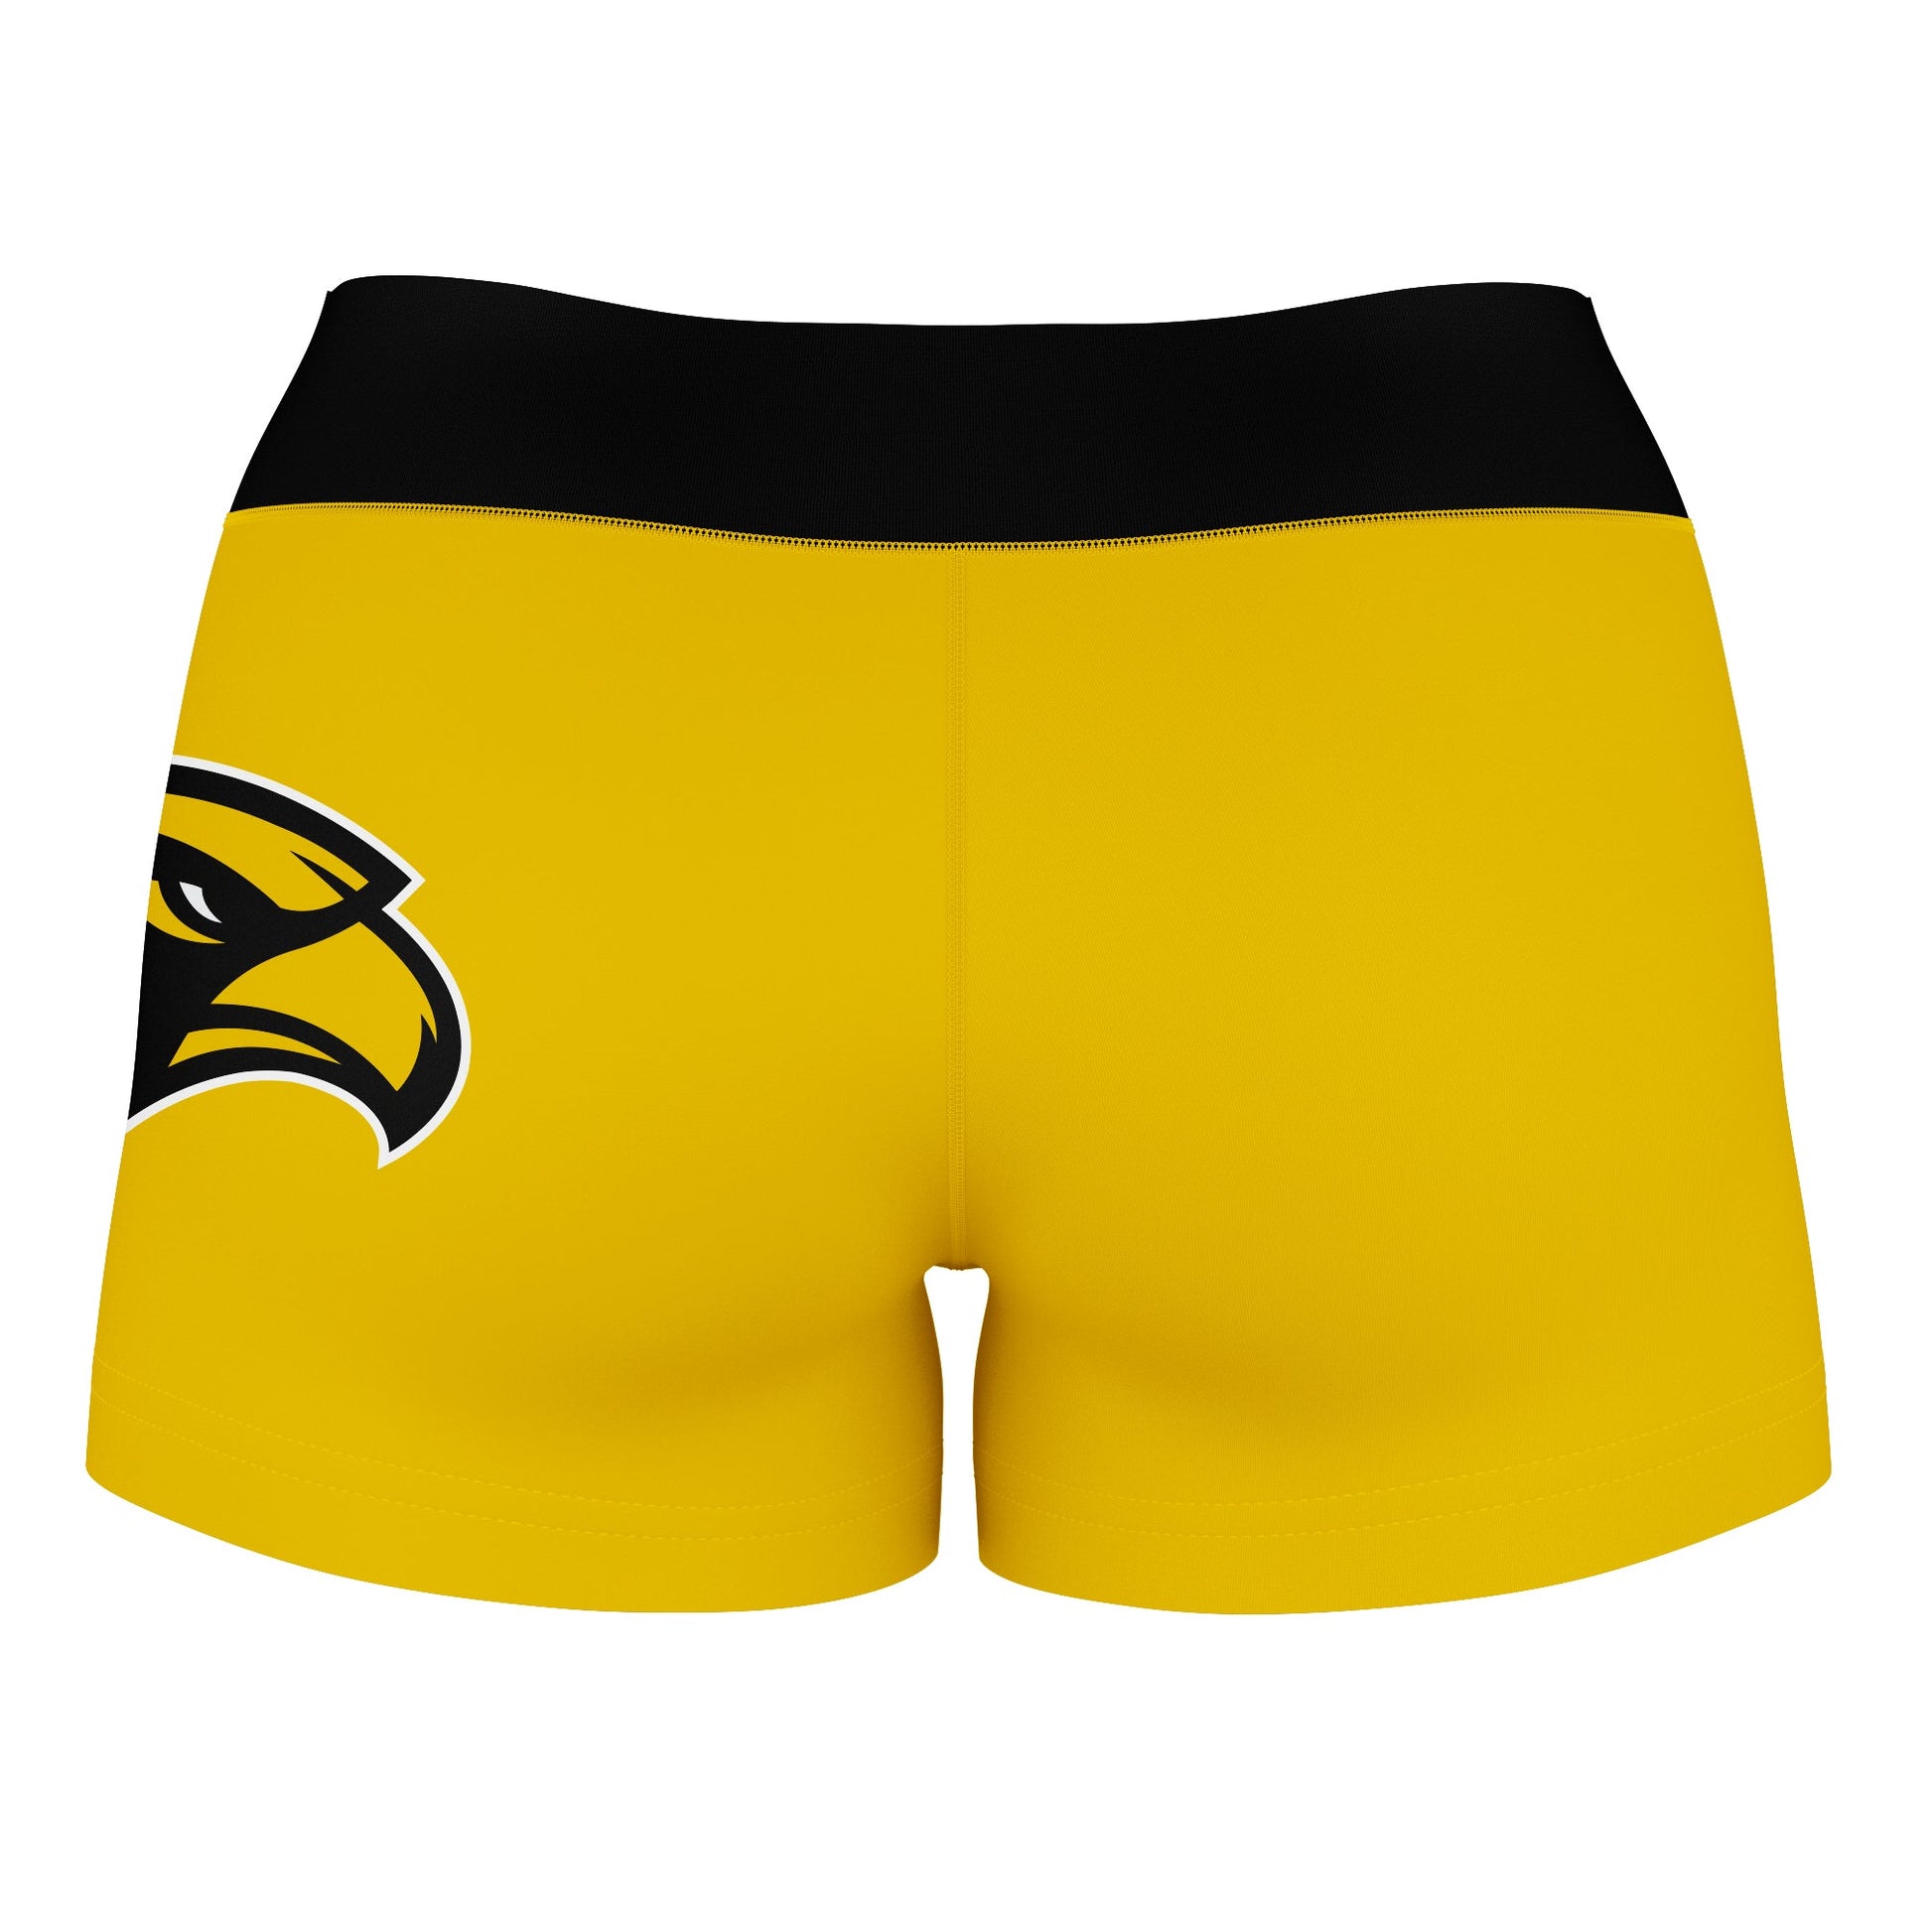 Southern Miss Golden Eagles Logo on Thigh & Waistband Gold Black Women Yoga Booty Workout Shorts 3.75 Inseam - Vive La F̻te - Online Apparel Store